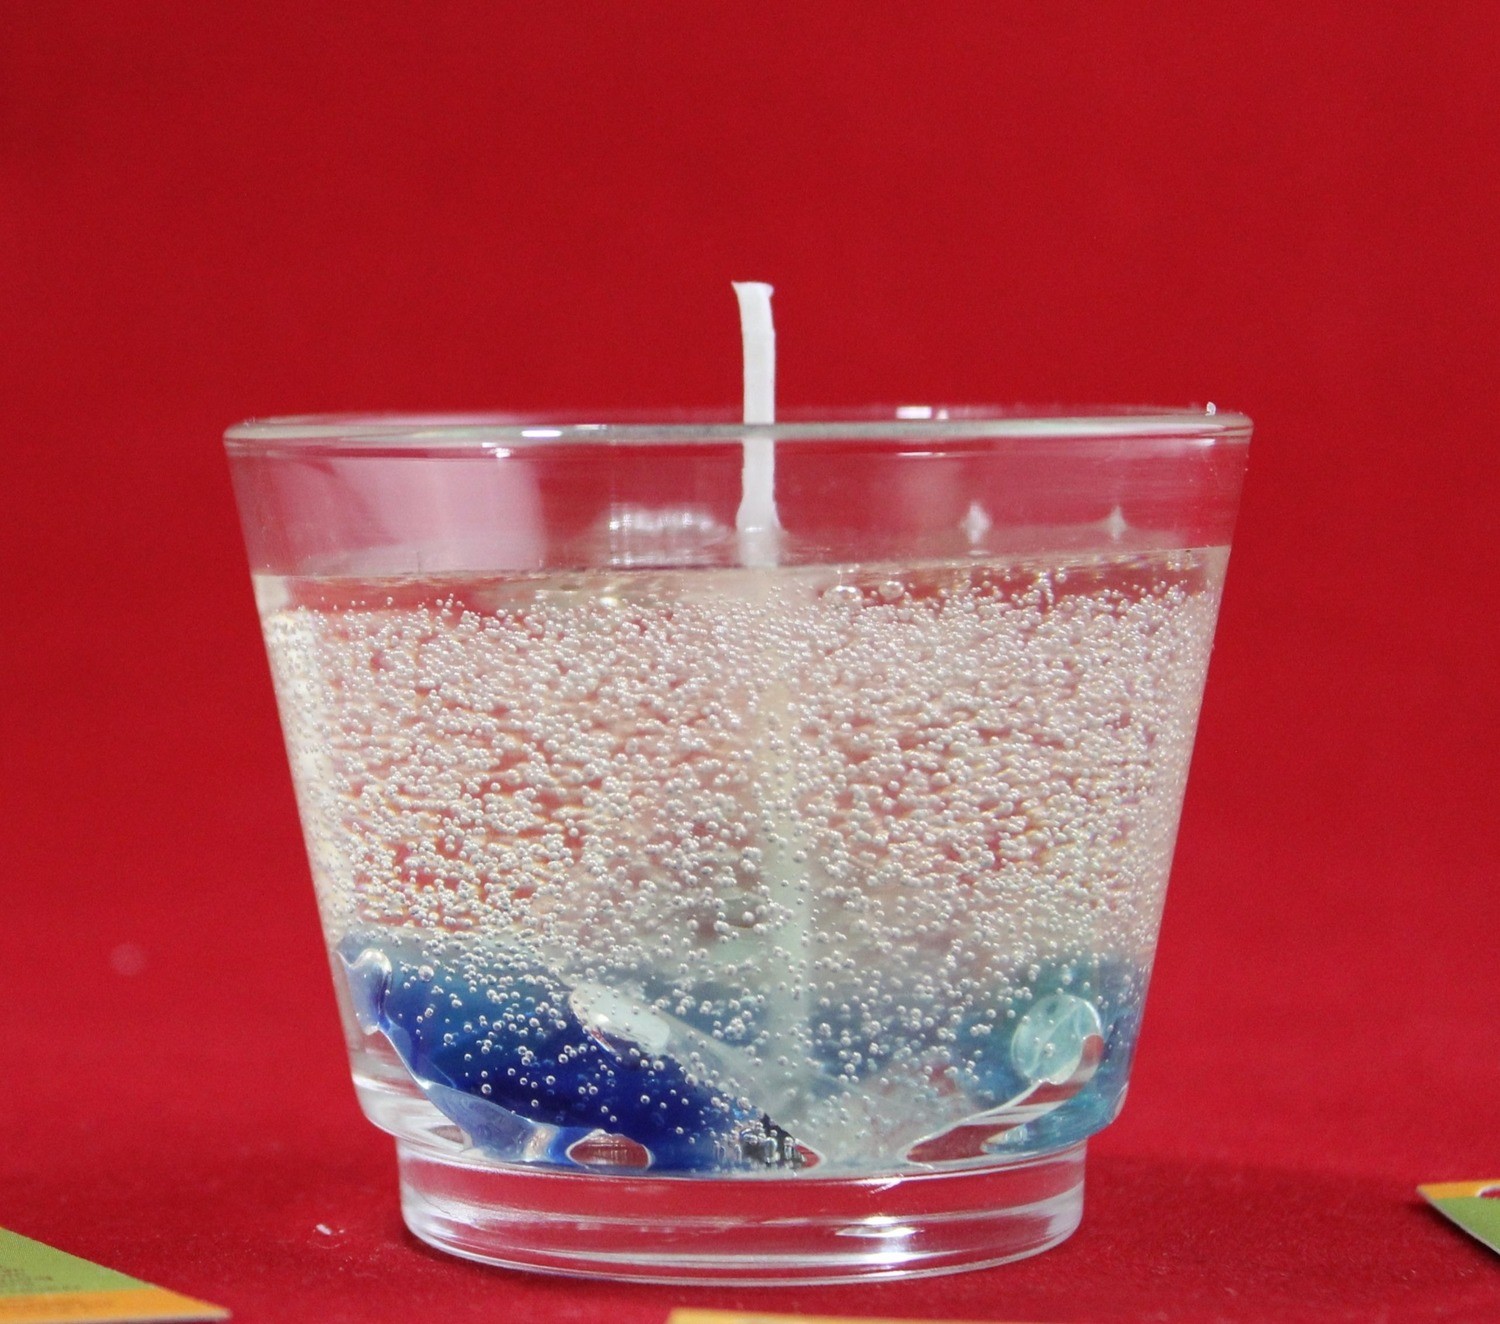 I Votives Scented Gel Candle In Votive Glass with Marble Embeds